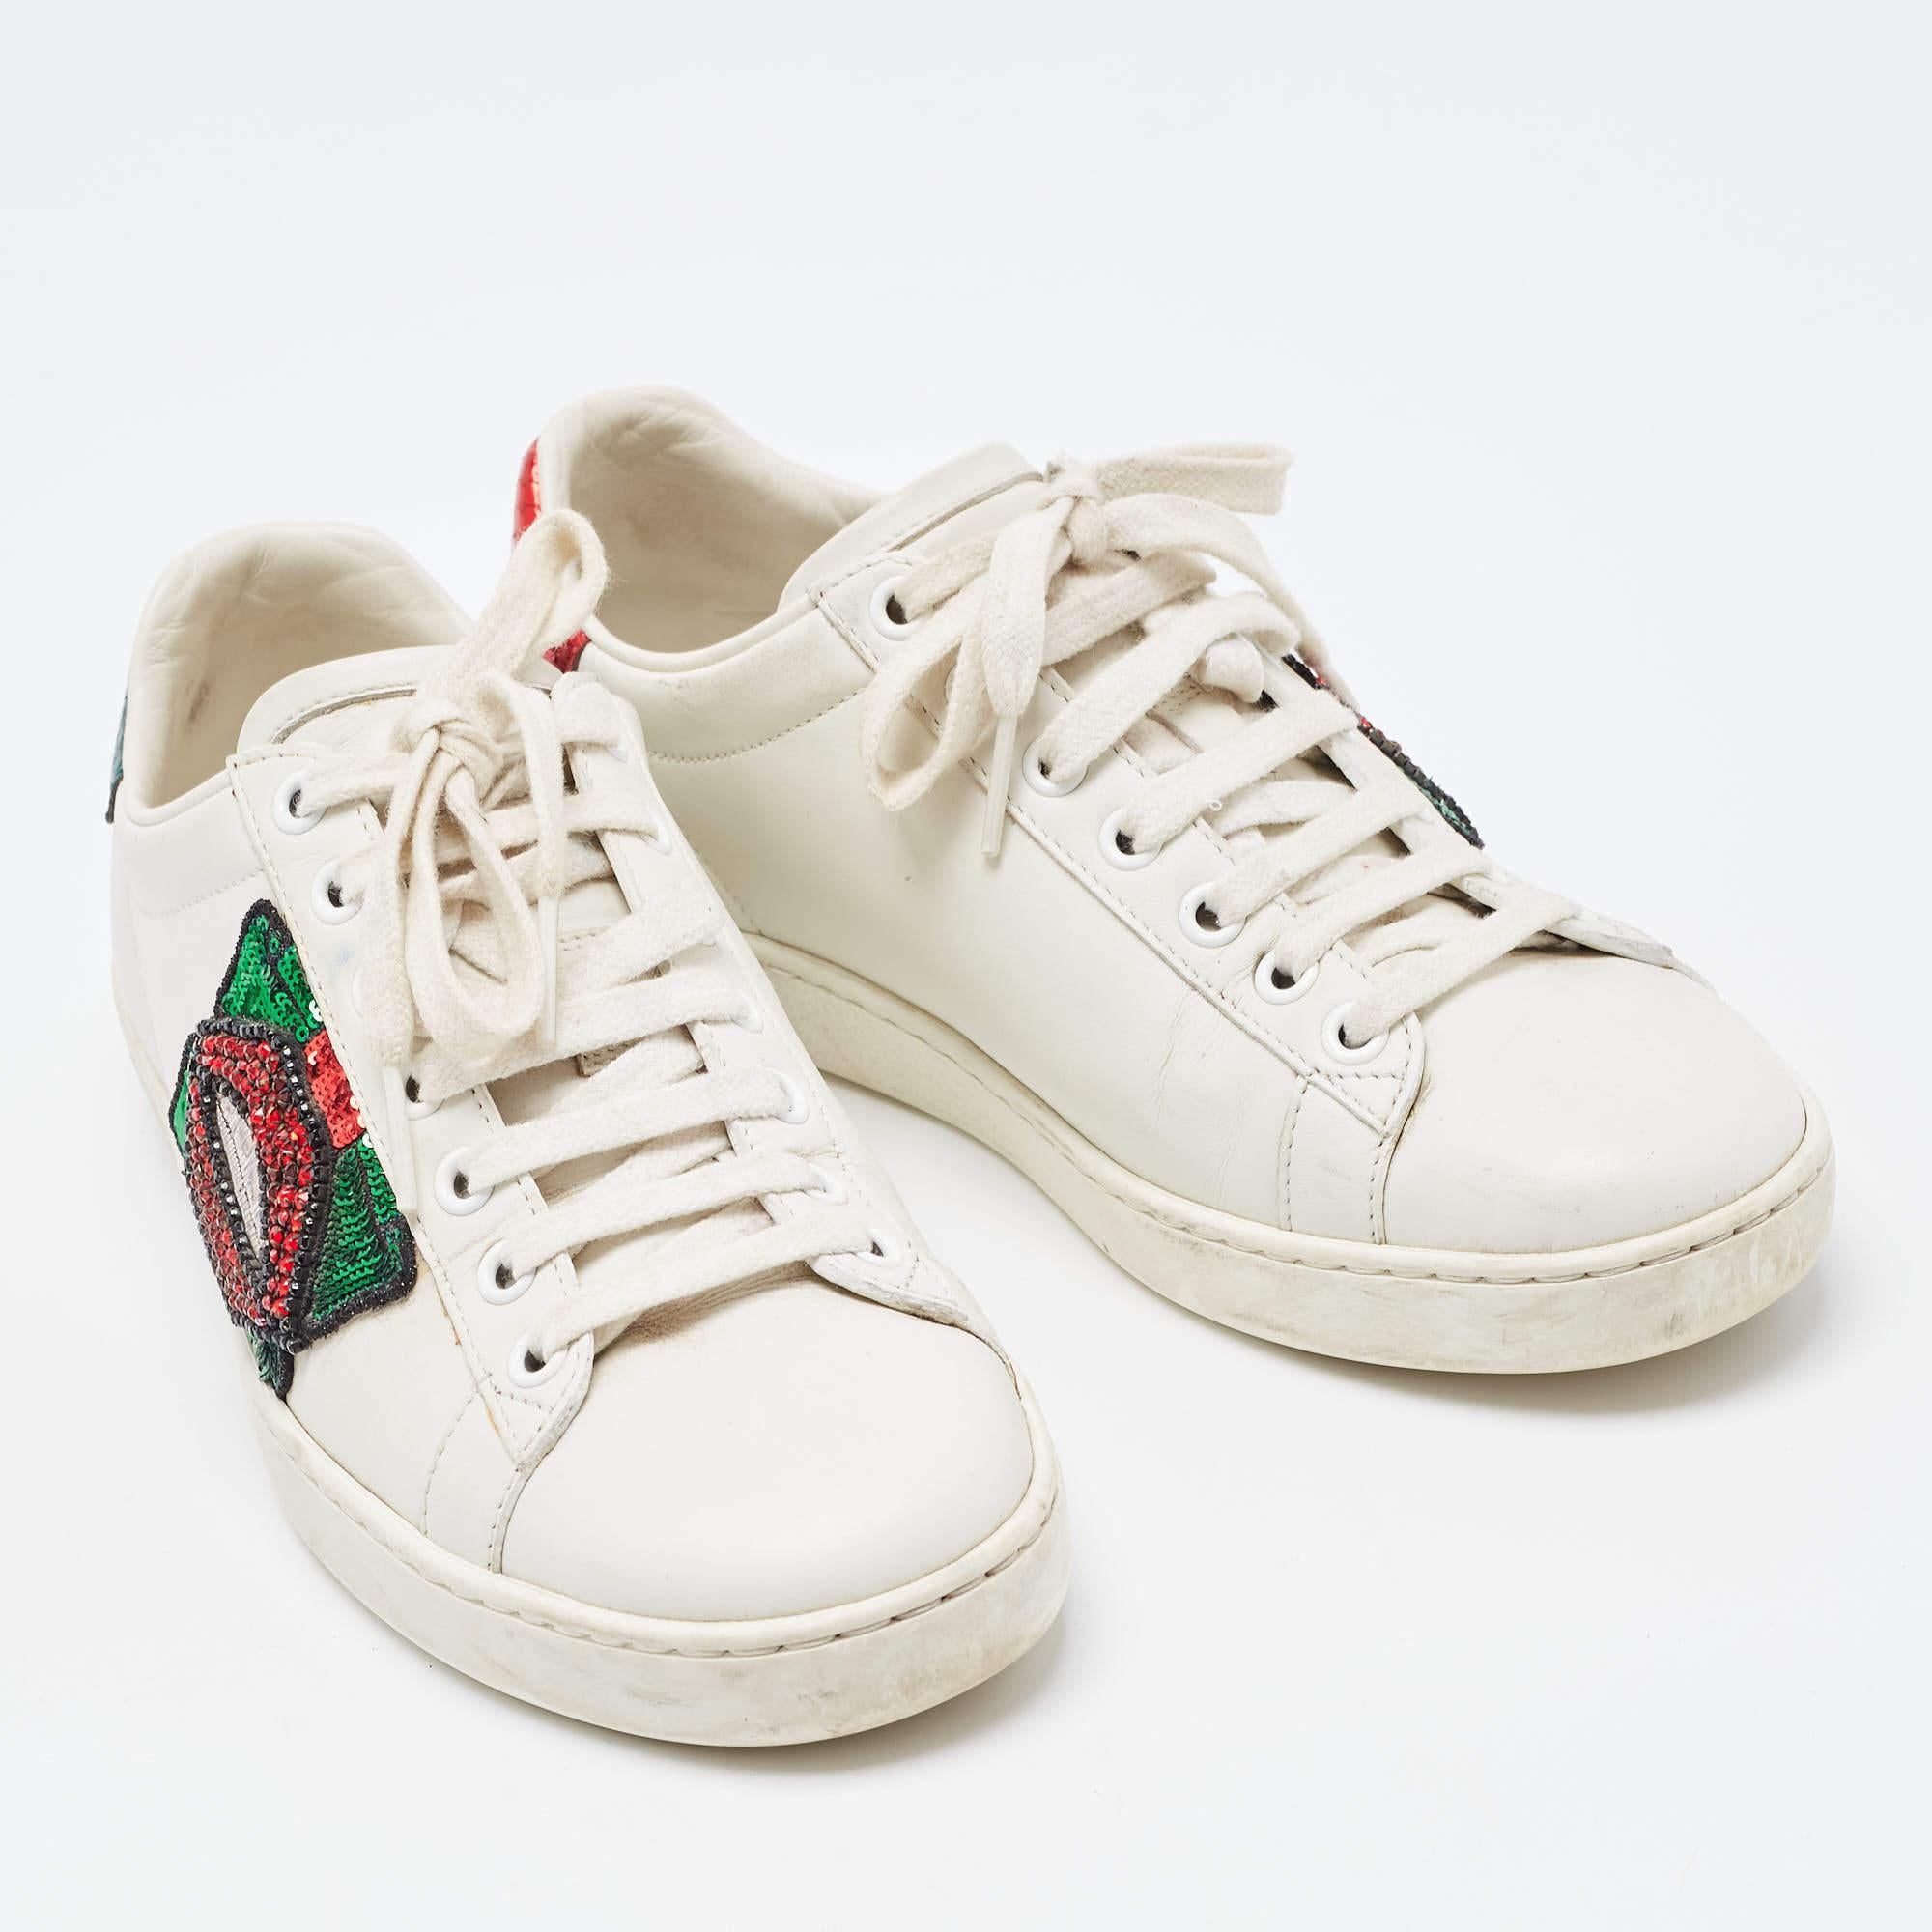 Upgrade your style with these Gucci sneakers. Meticulously designed for fashion and comfort, they're the ideal choice for a trendy and comfortable stride.

